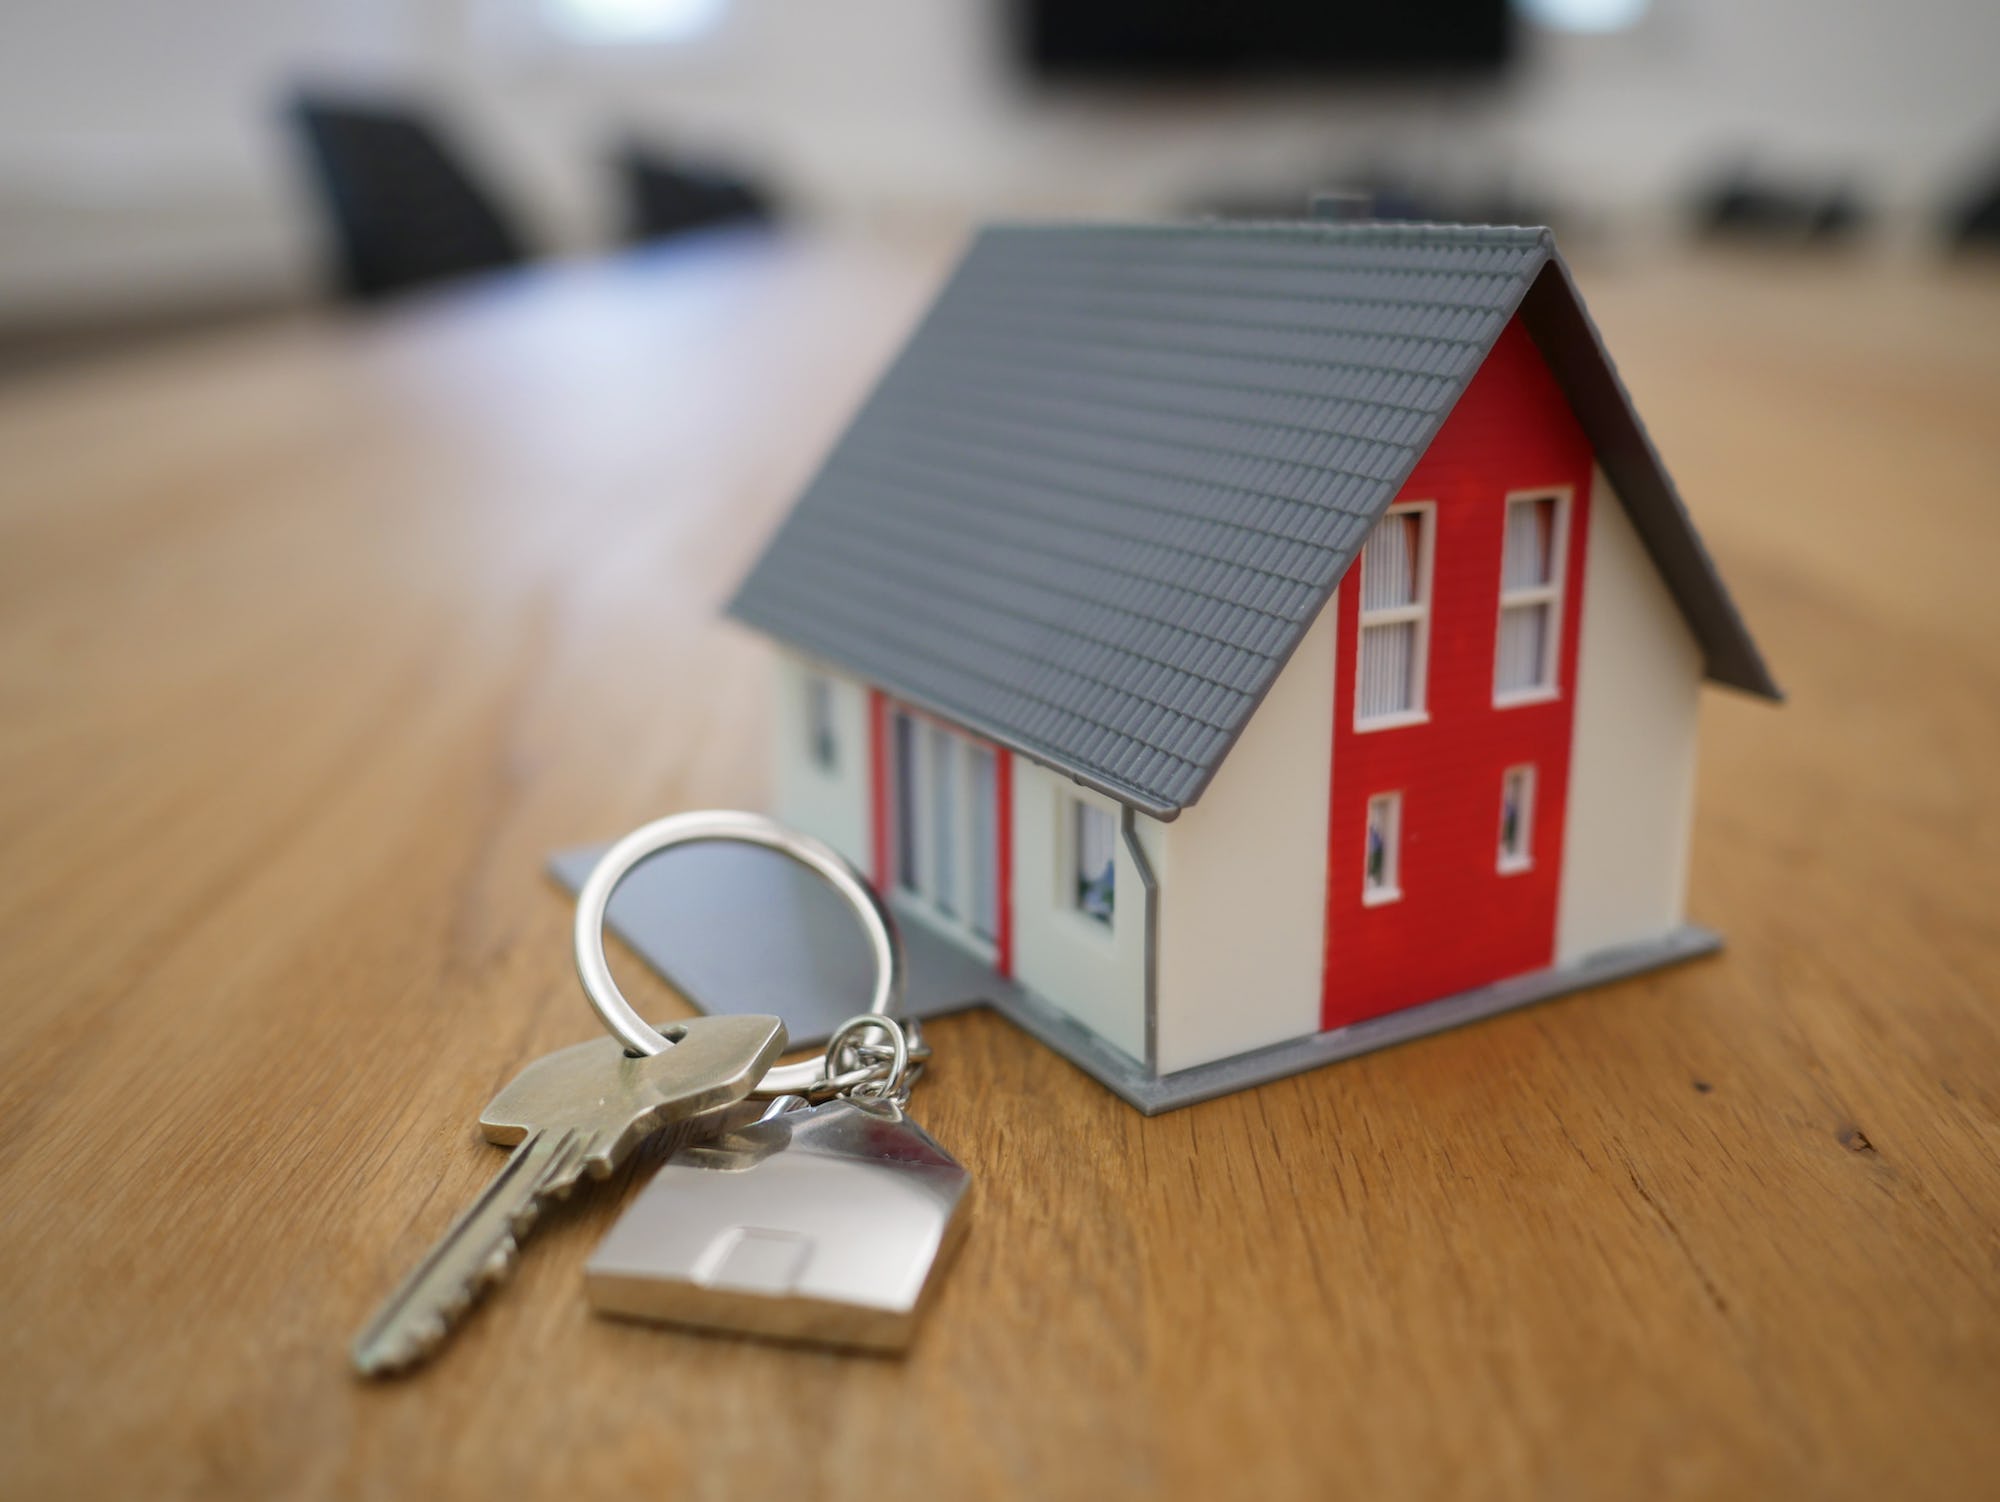 Image of a miniature house model with a set of house keys - has the ship sailed on home ownership? 